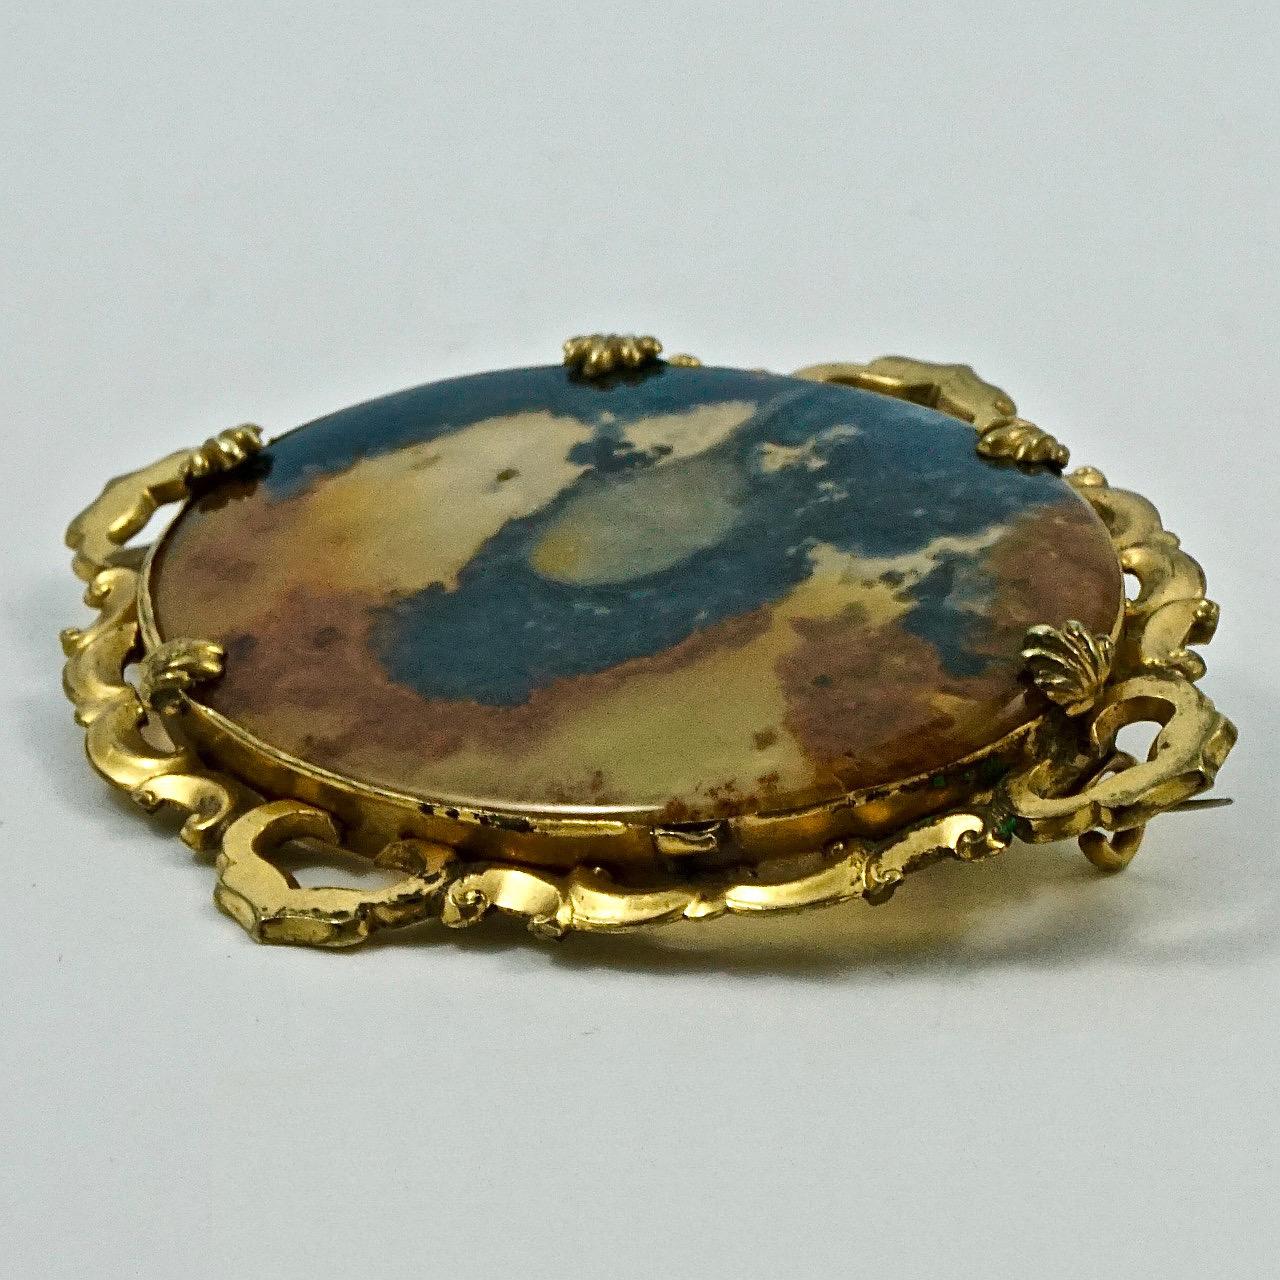 Wonderful antique Victorian large moss agate brooch, with an ornate gold plated setting. It has the old 